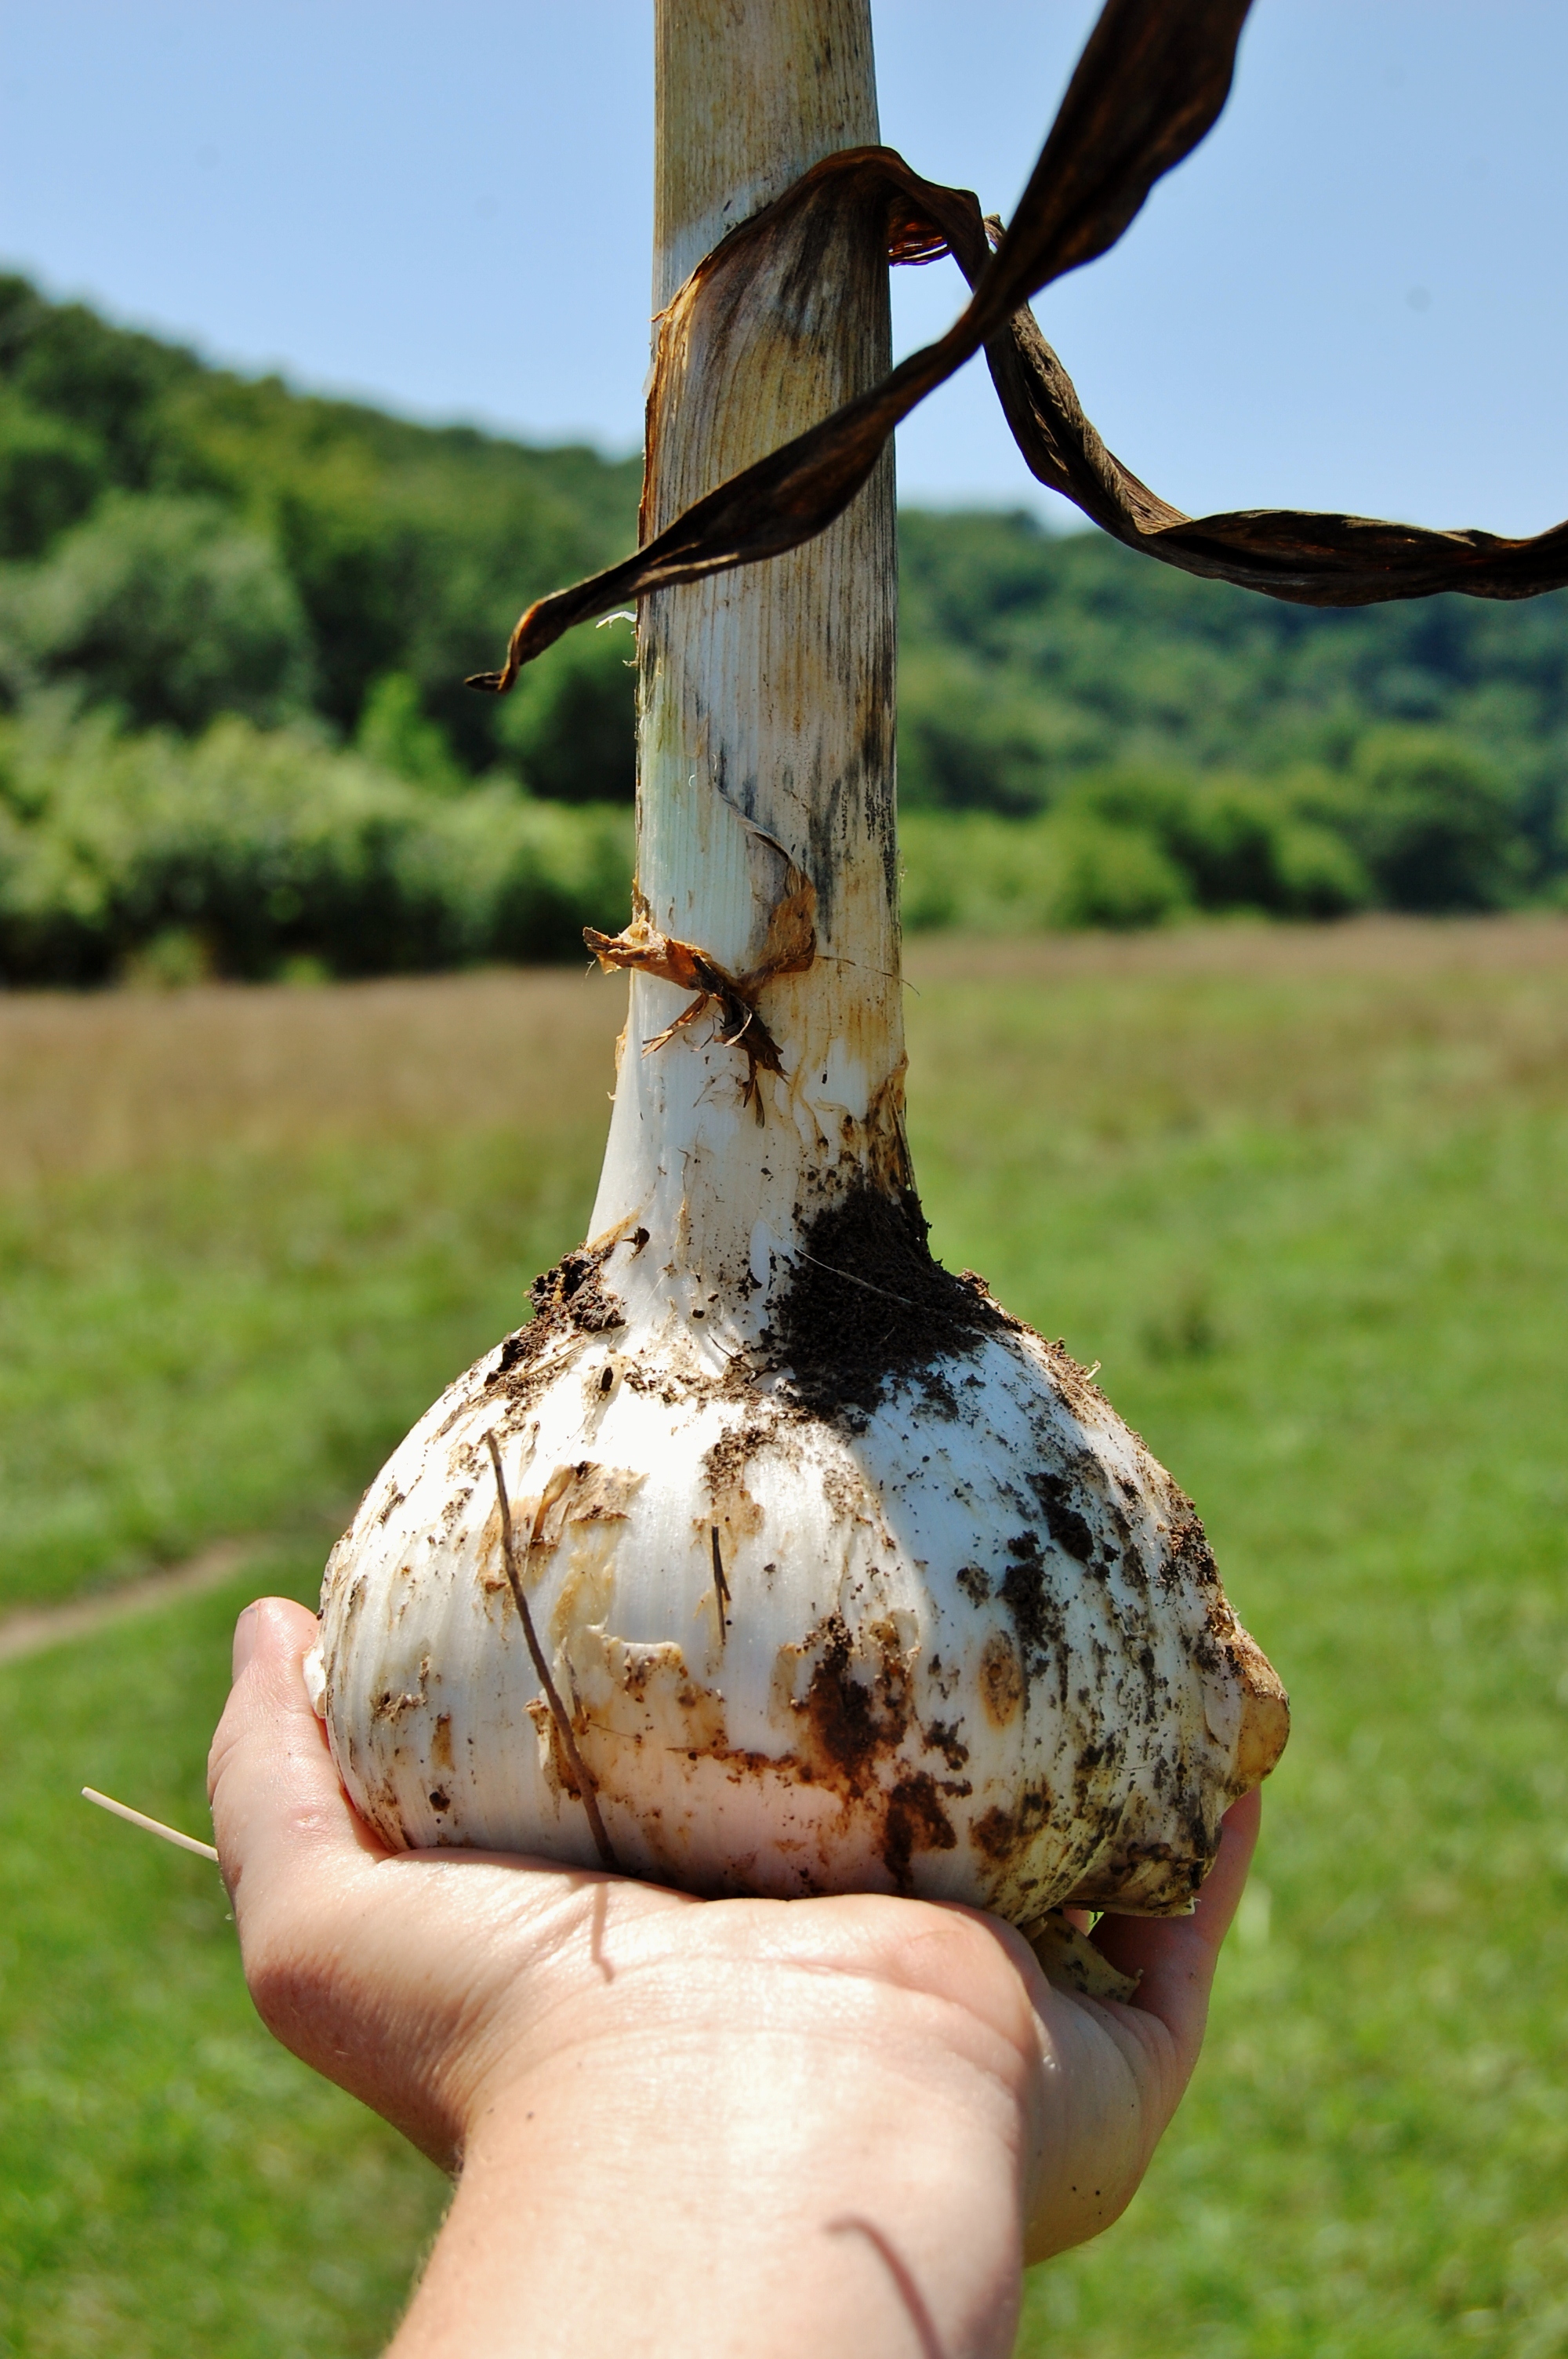    
  
 
  
    At all stages handle your garlic carefully.&nbsp; It is alive!&nbsp; Bruise it, and it will not keep as long.  Hold back your nicest bulbs for replanting again in the fall.  
  
 Normal 
 0 
 
 
 
 
 false 
 false 
 false 
 
 EN-US 
 